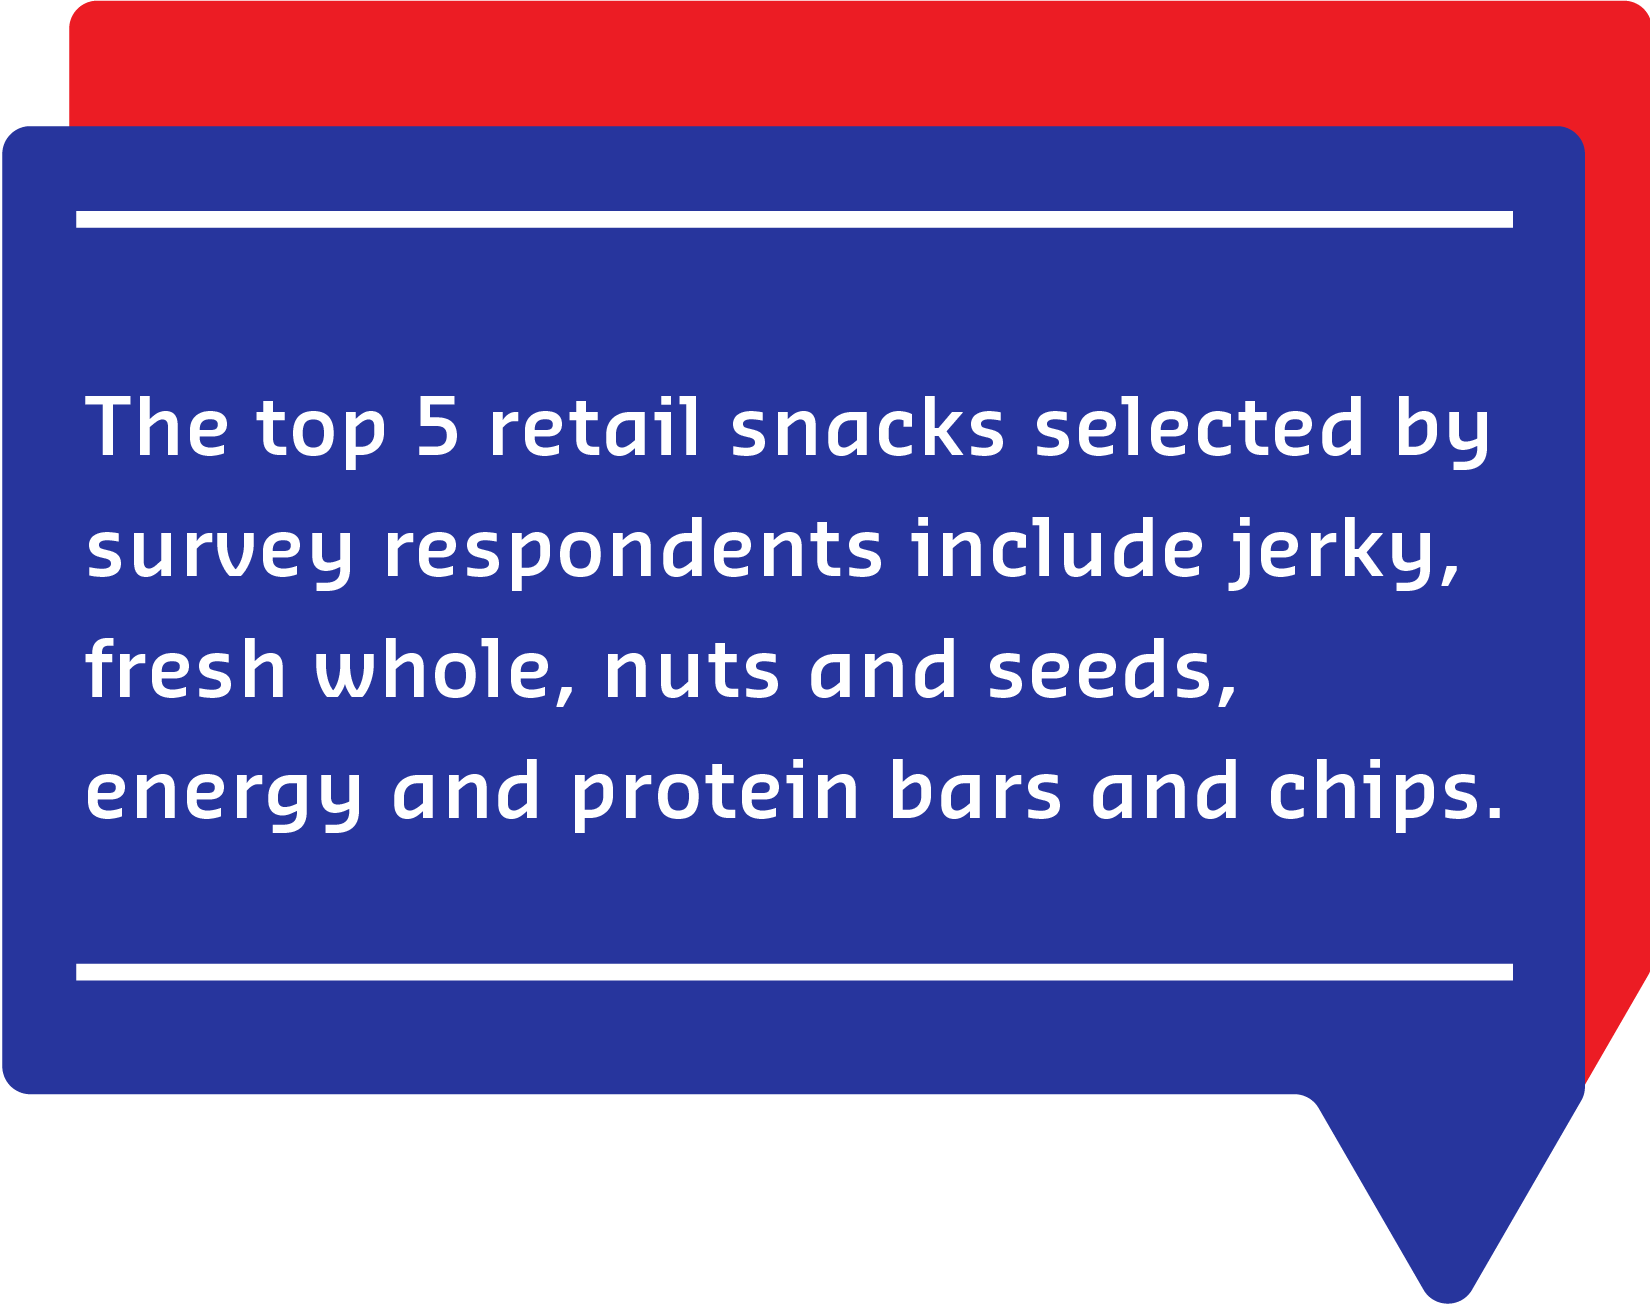 The top 5 retail snacks selected by survey respondents include jerky, fresh whole, nuts and seeds, energy and protein bars and chips. 